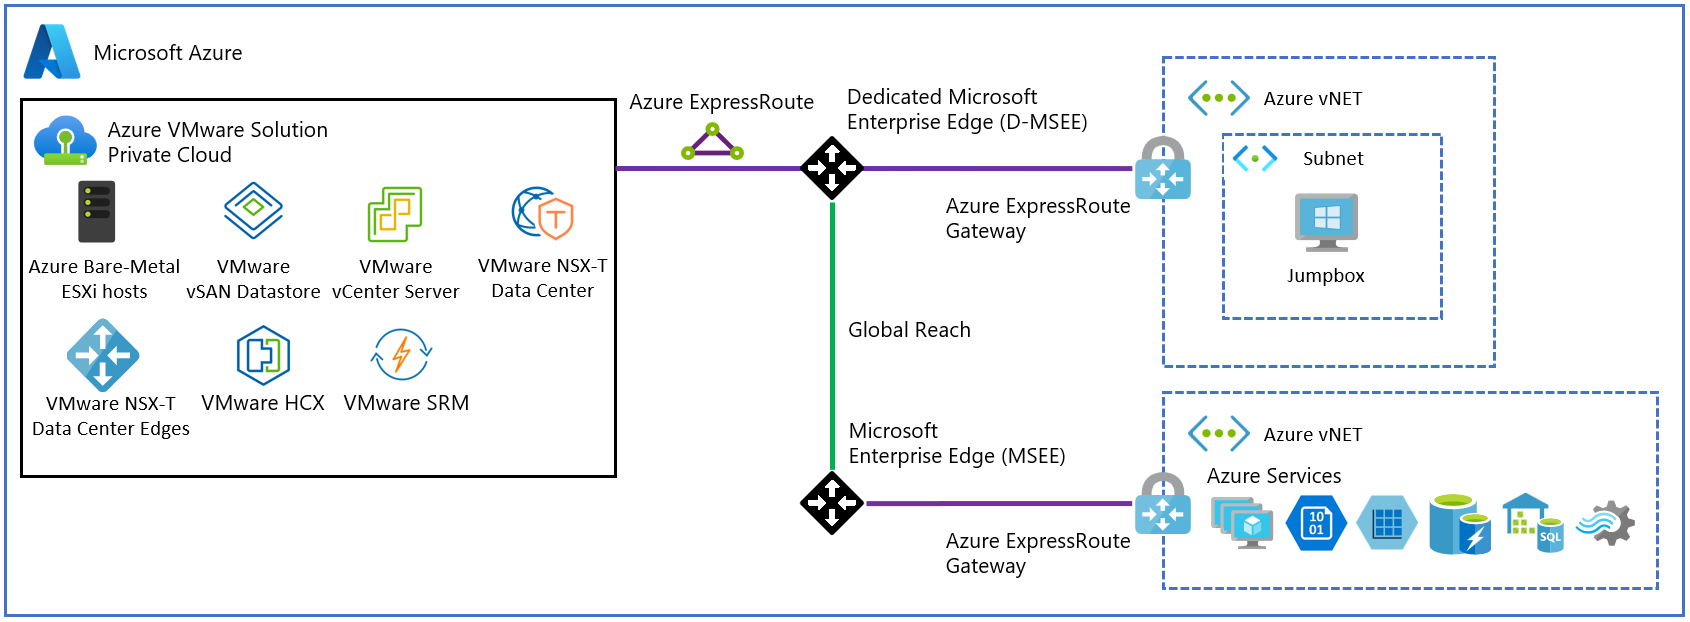 Diagram showing the basic network interconnectivity established at the time of an Azure VMware Solution private cloud deployment.